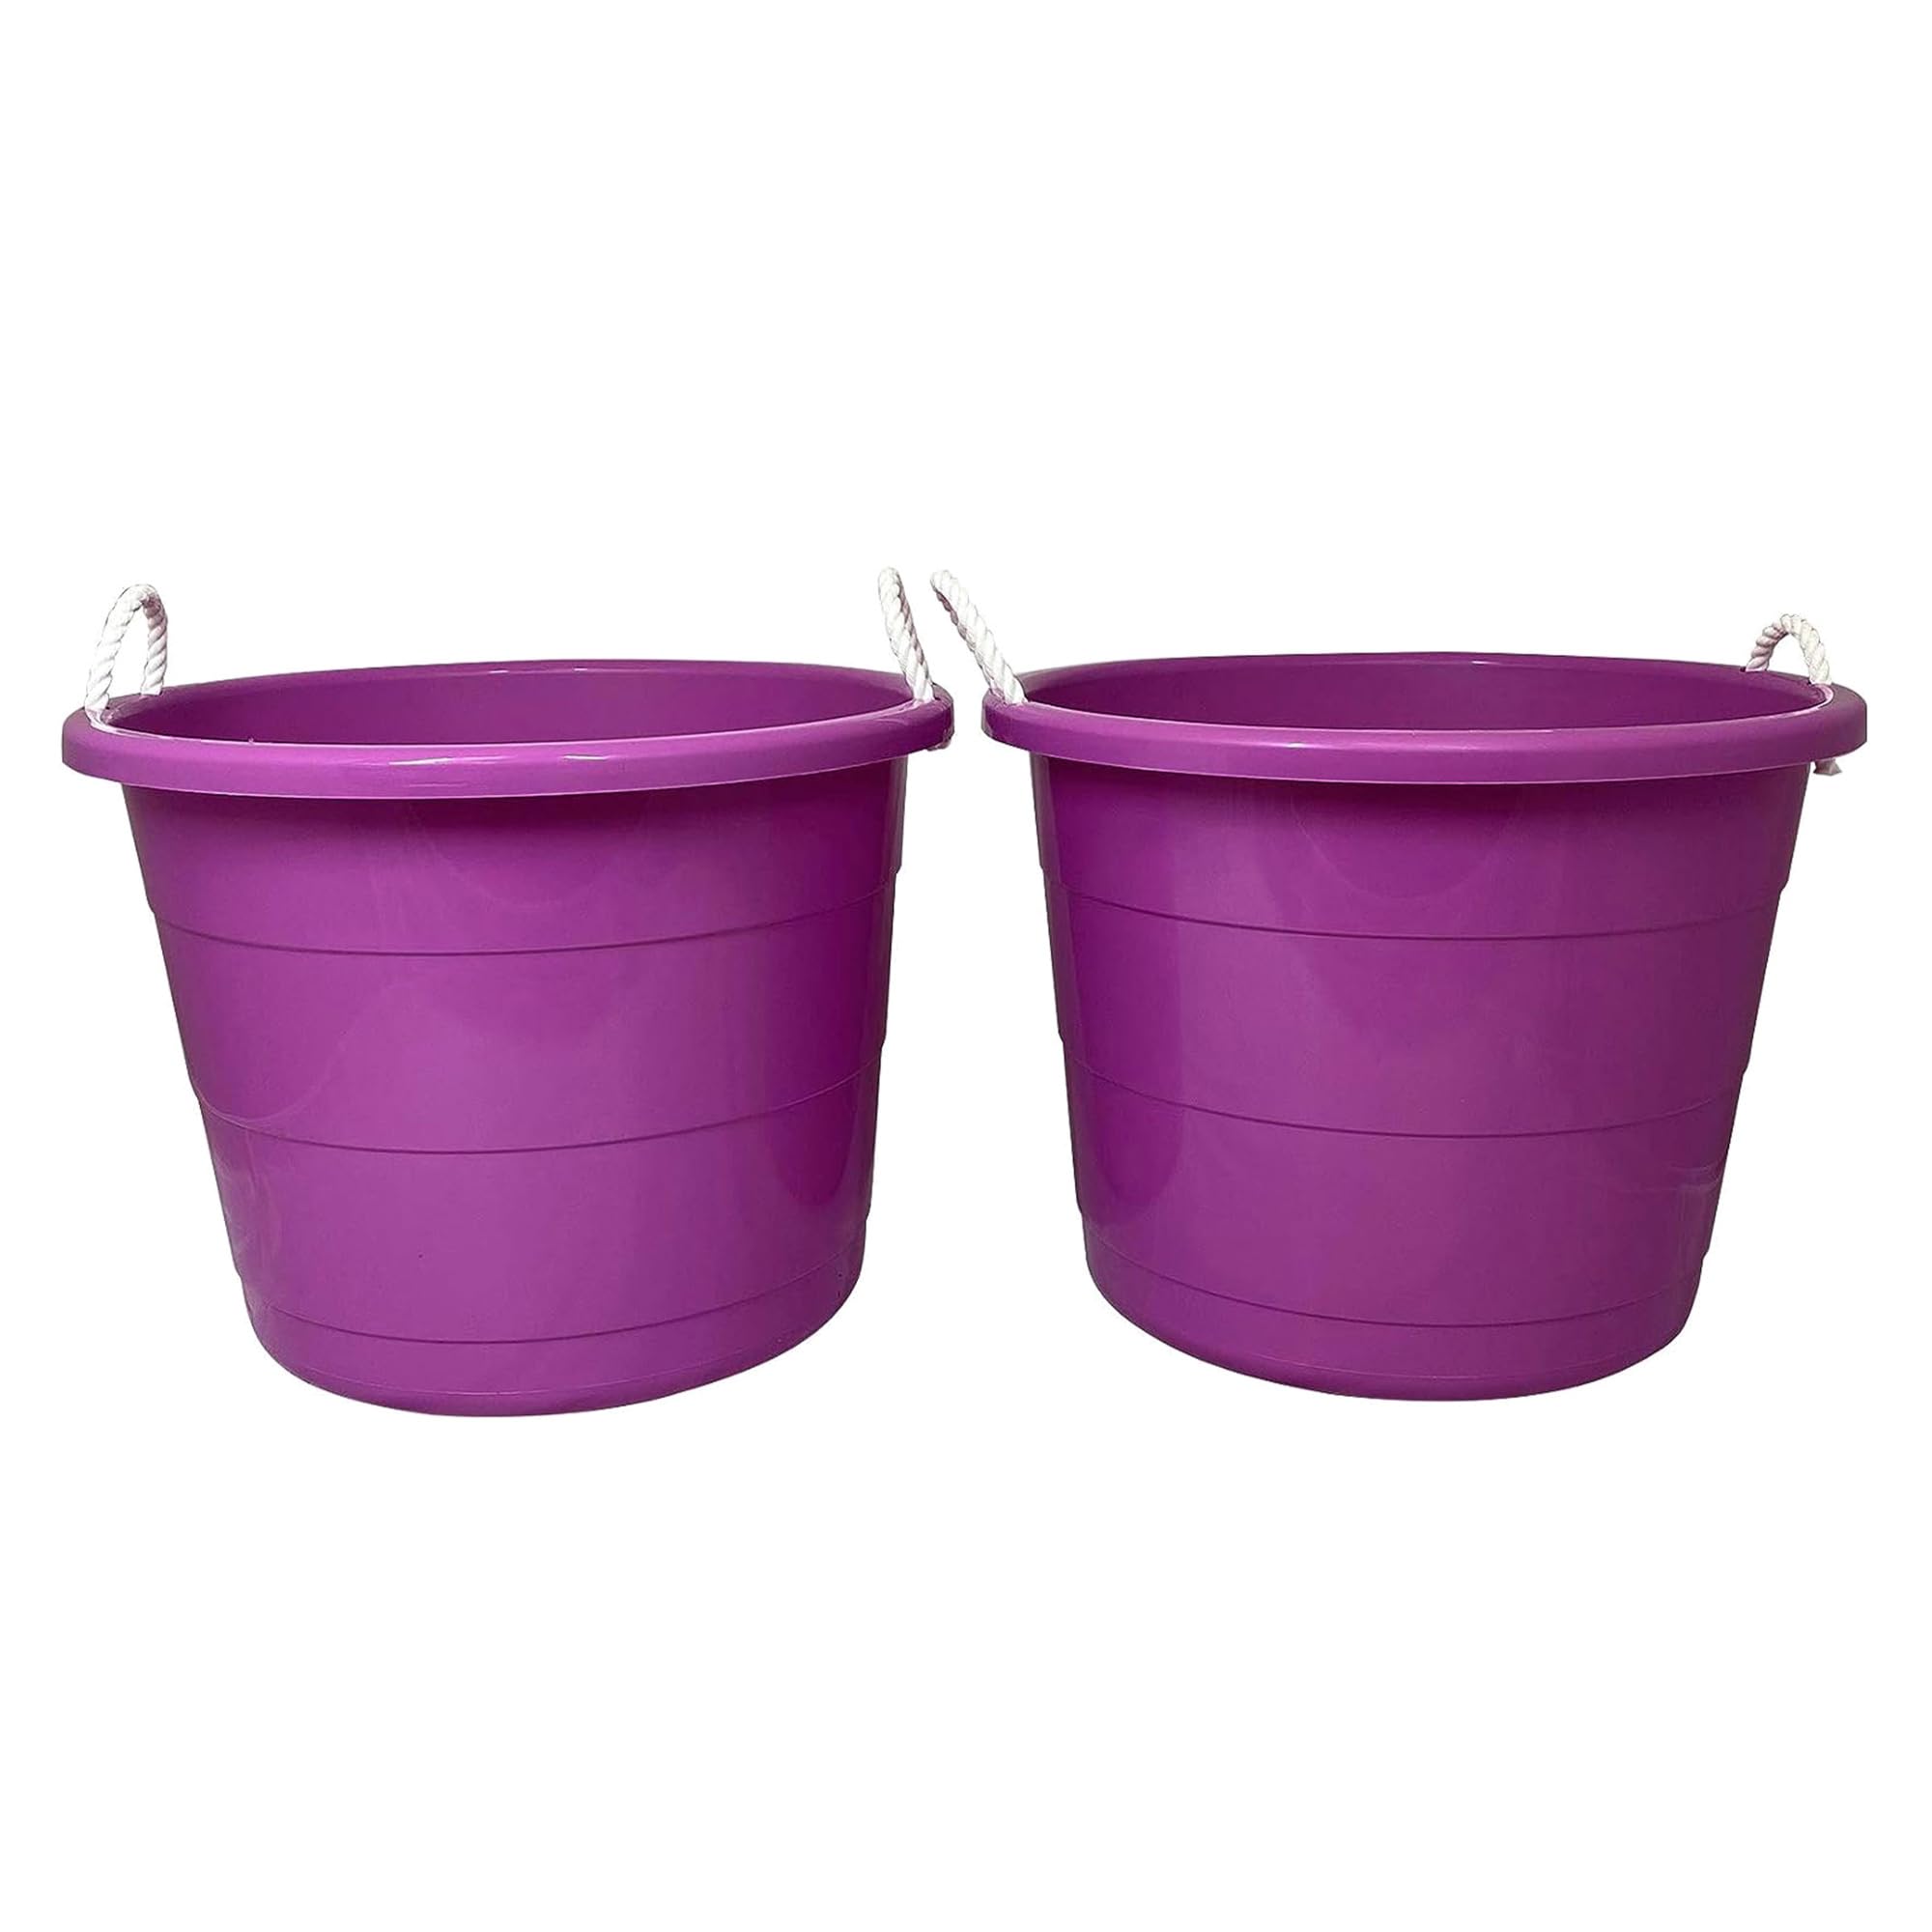 Homz 17-Gallon Indoor Outdoor Storage Bucket with Rope Handles for Sports Equipment, Party Cooler, Gardening, Toys and Laundry, Orchid Purple (4 Pack)